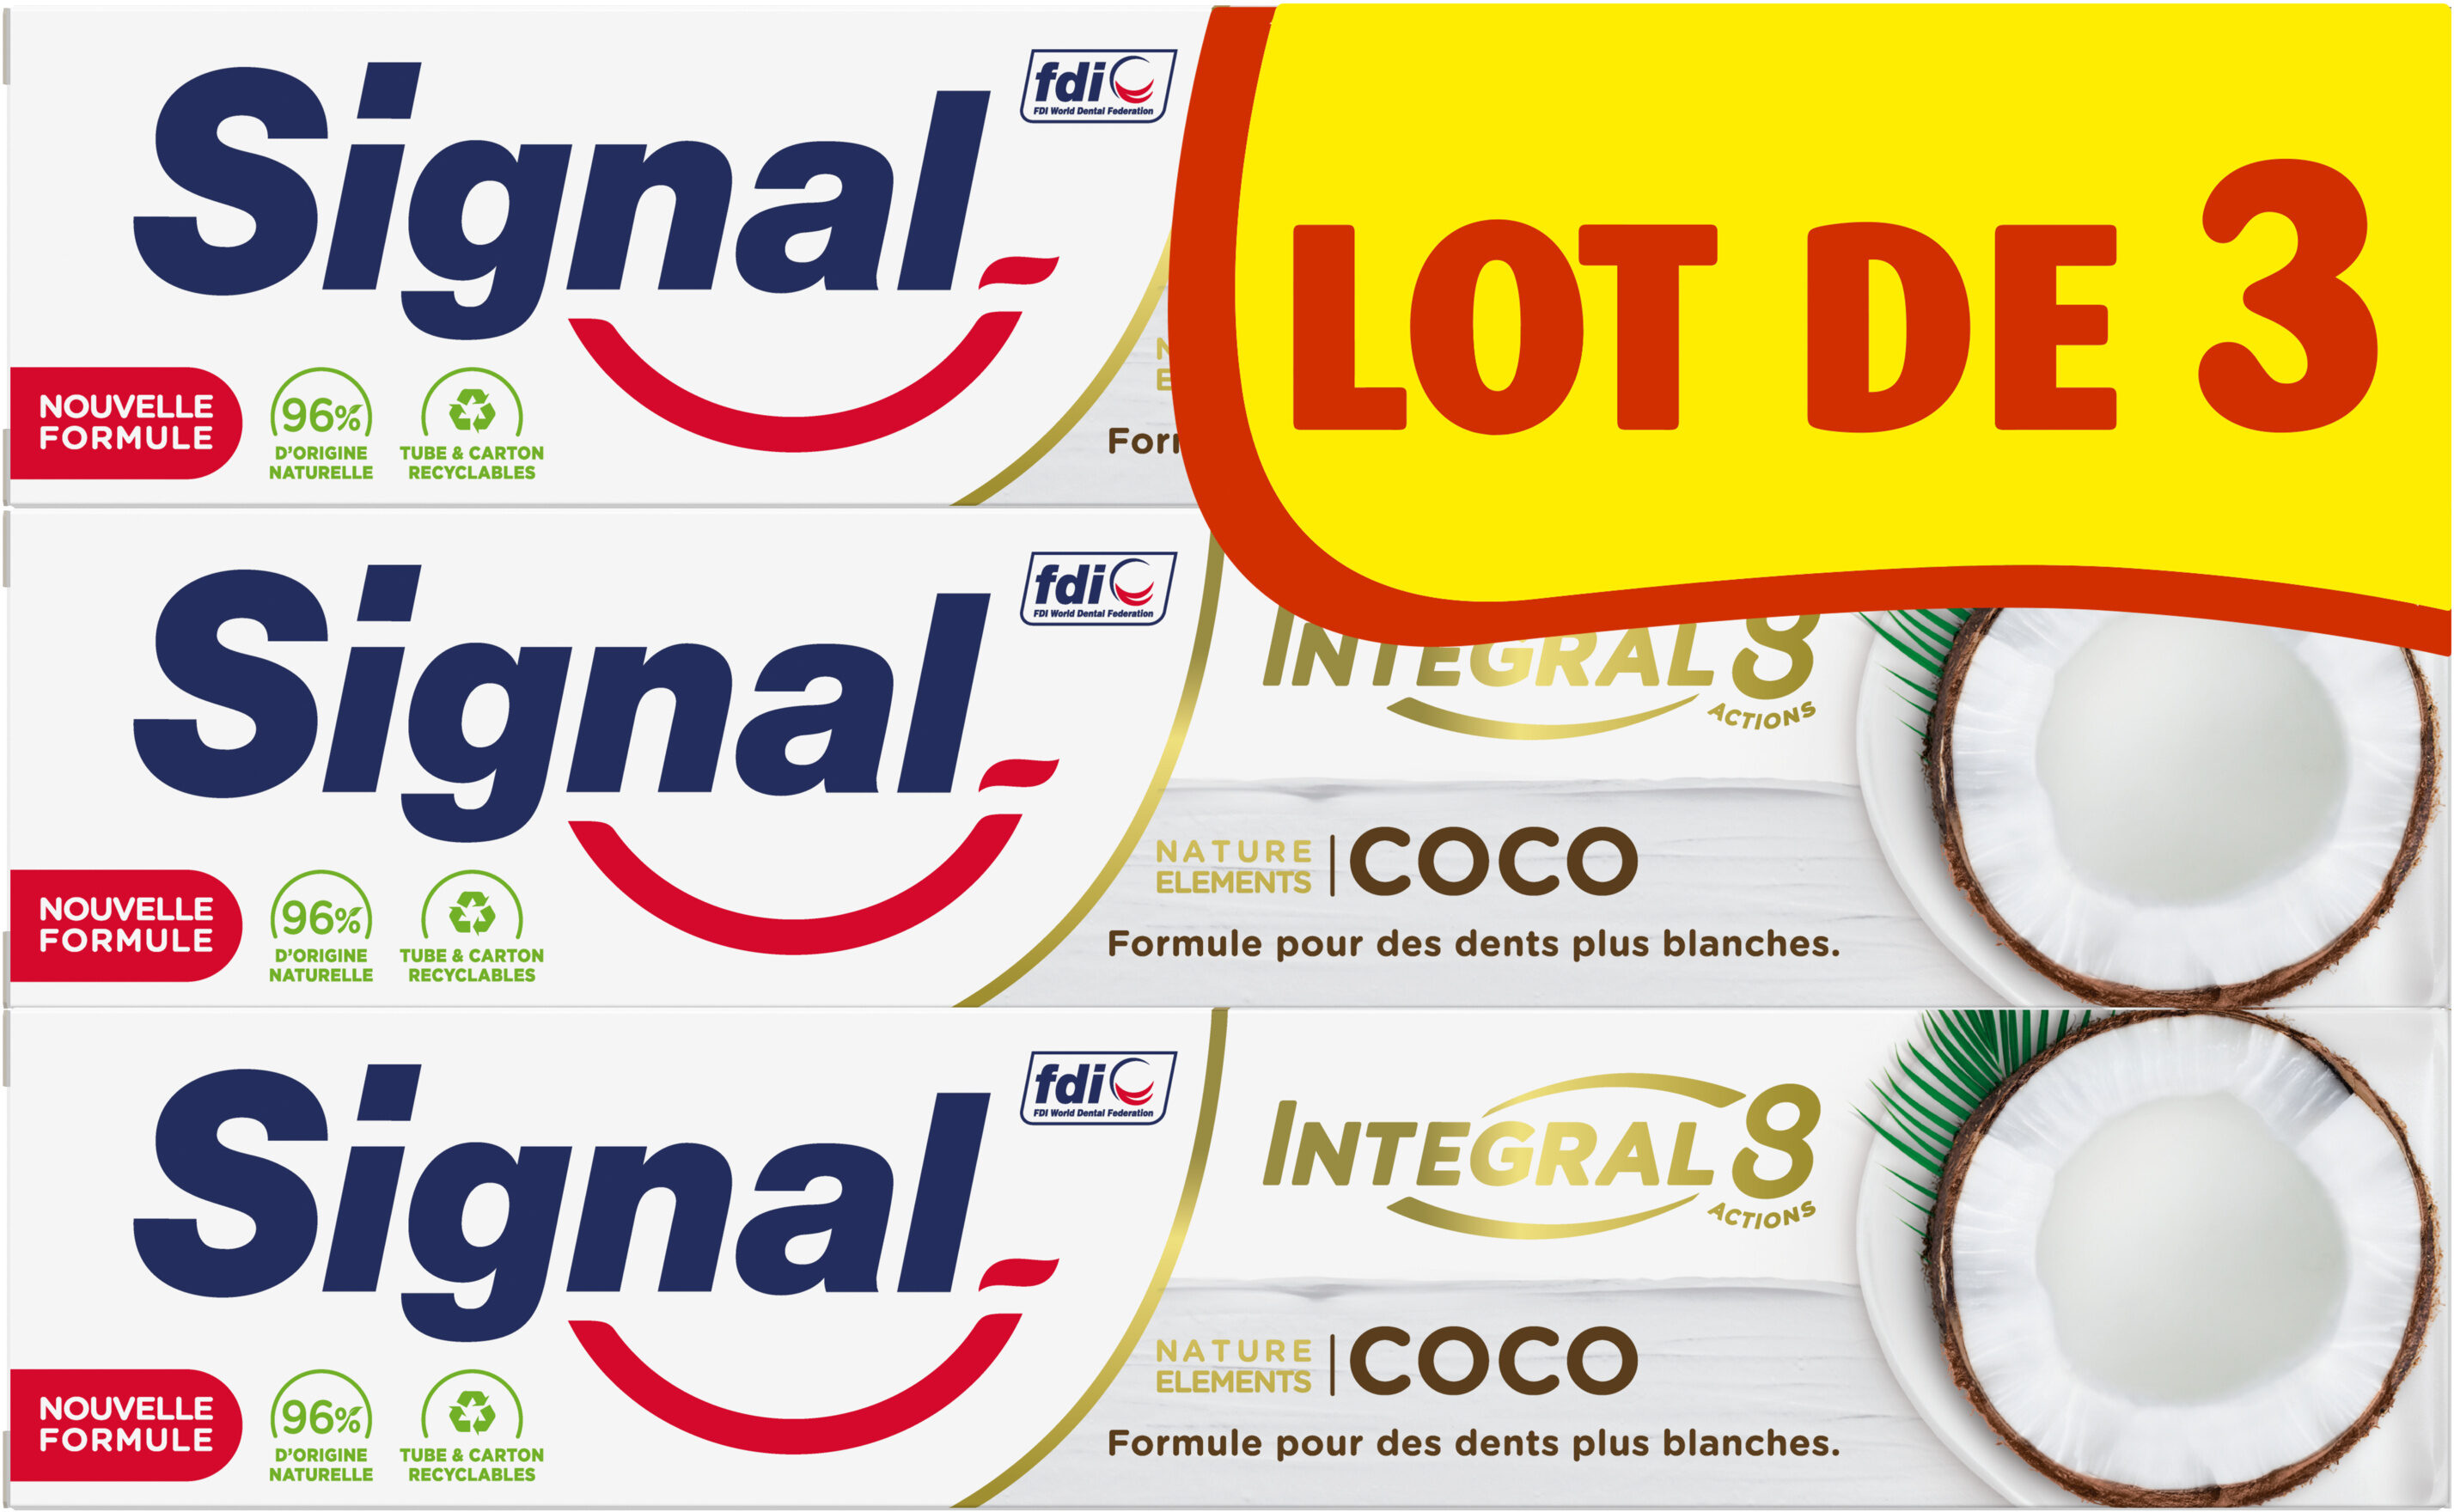 Signal Integral 8 Dentifrice Nature Elements Coco Blancheur 3x75ml - Product - fr